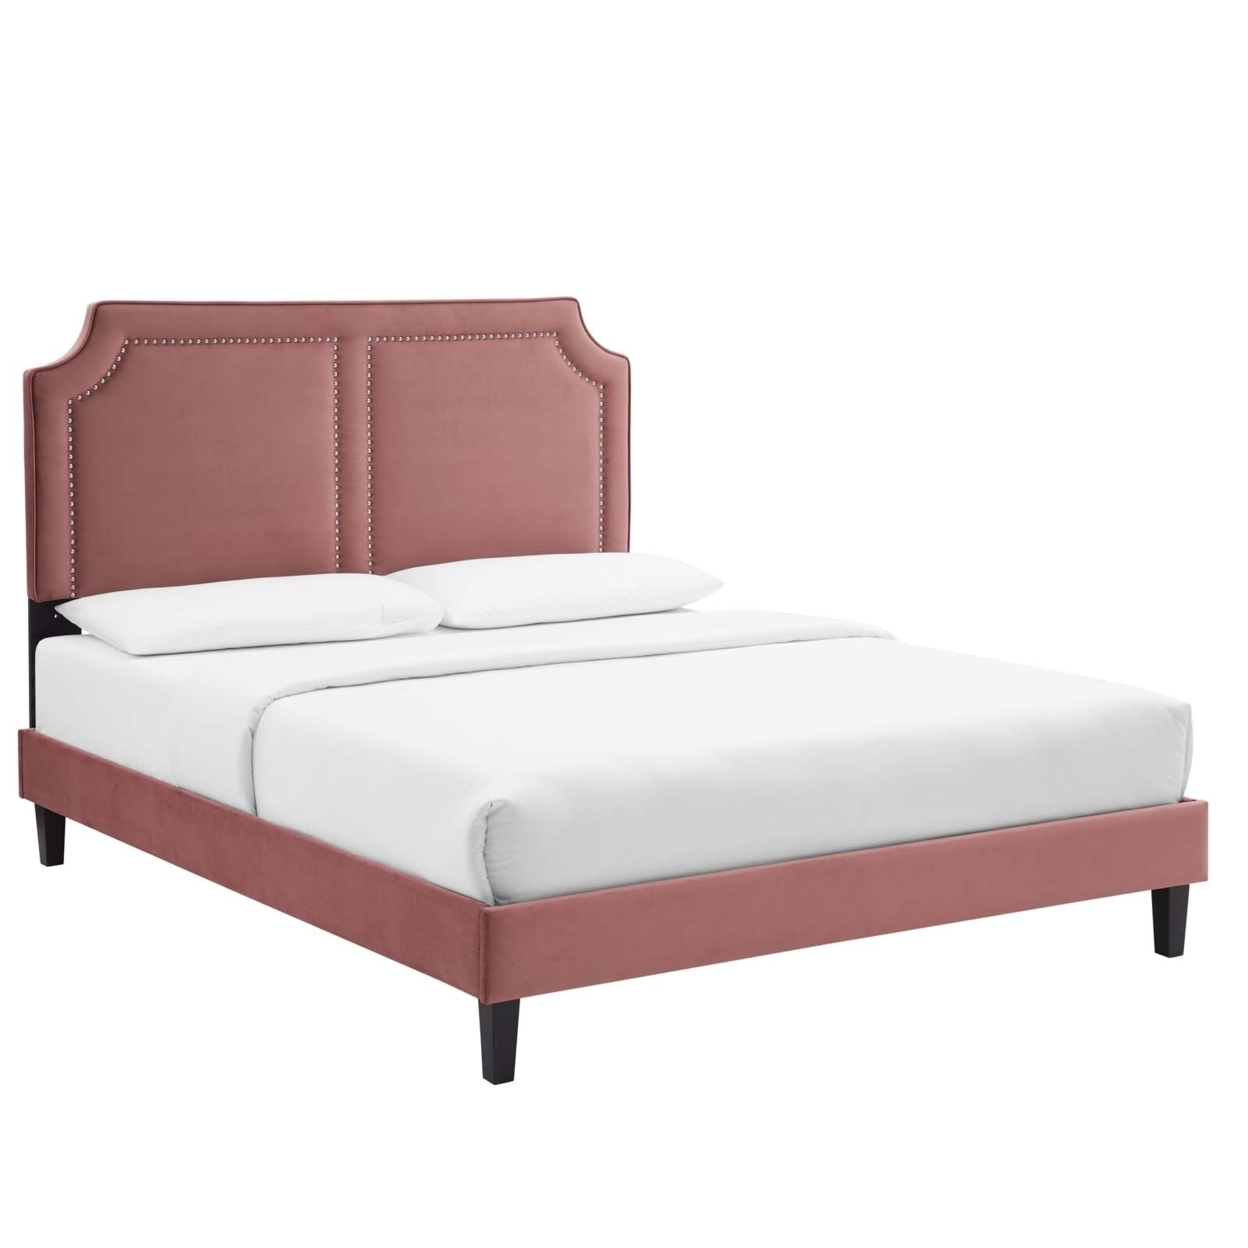 Twin Bed, Nailhead Trim, Dusty Pink Velvet, Tapered Wood Legs